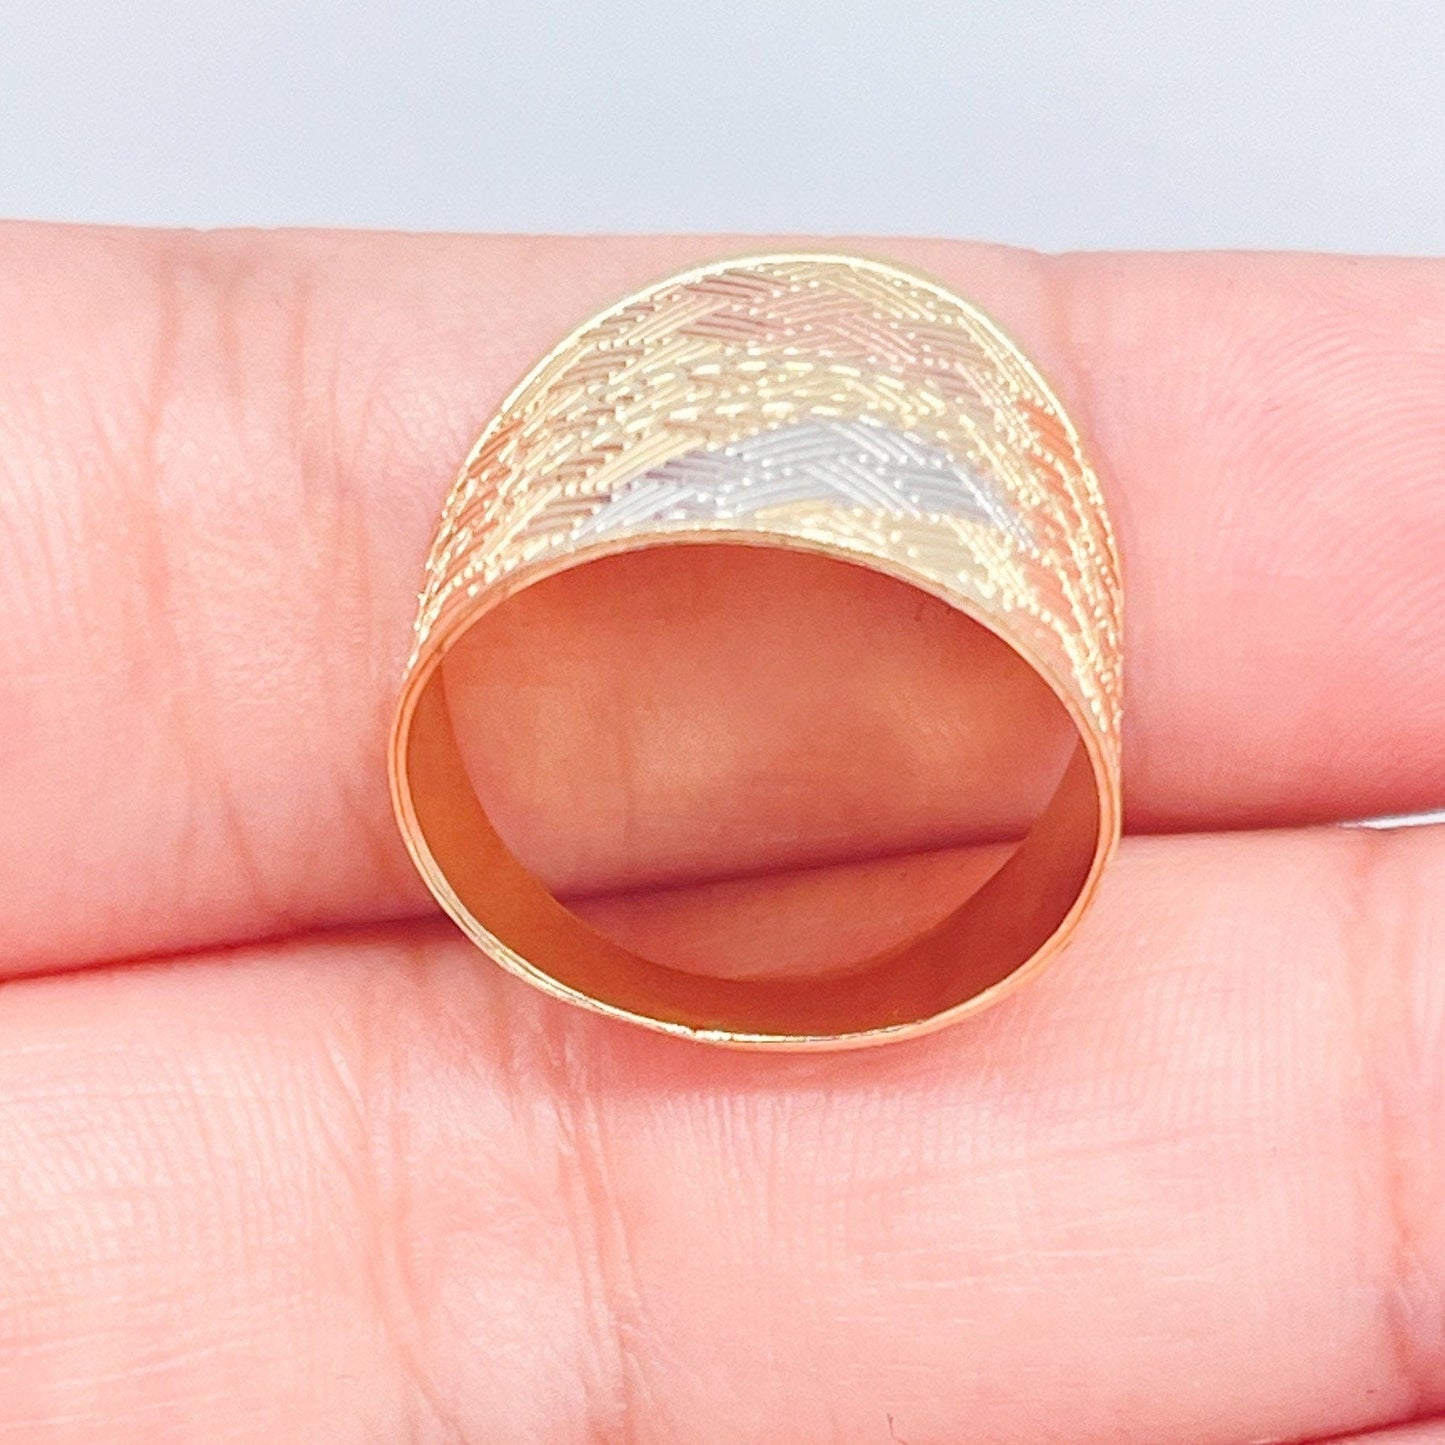 Large 18k Gold Layered Geometric Patterned Tri-Color Ring Wholesale Jewelry